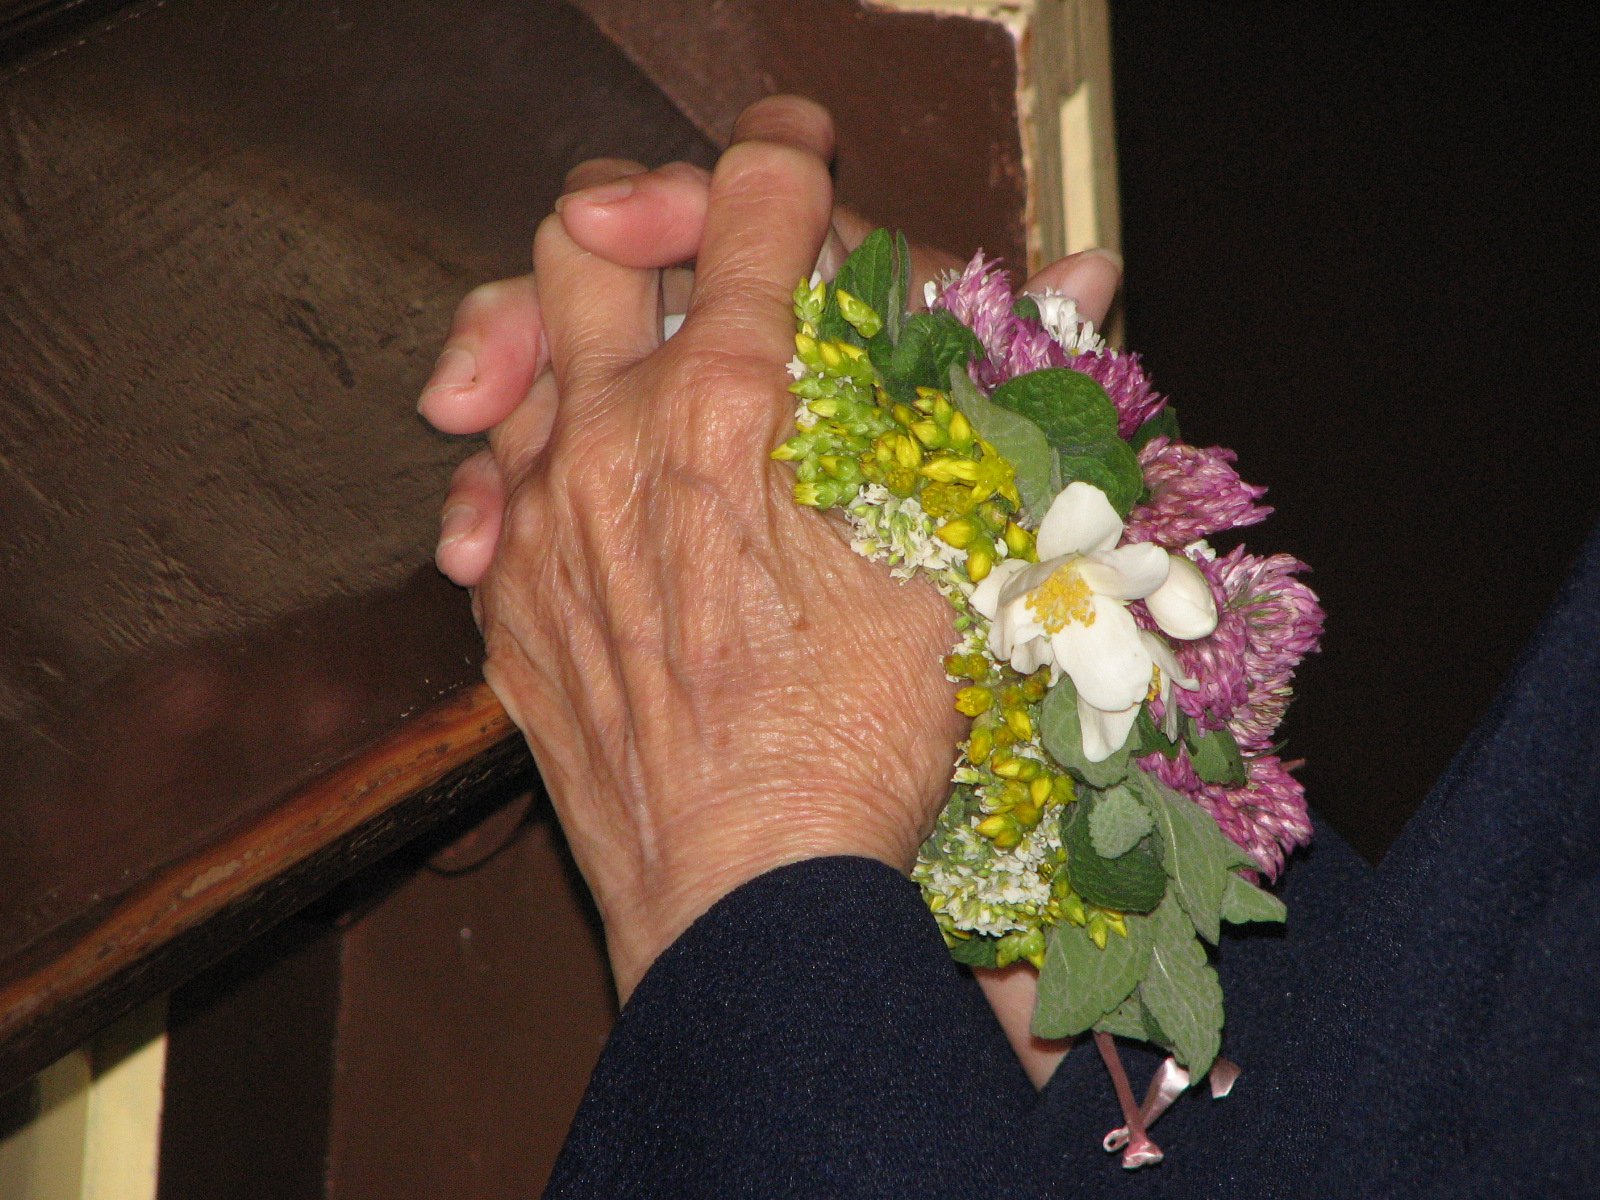 a person holding flowers and placing them in their palm